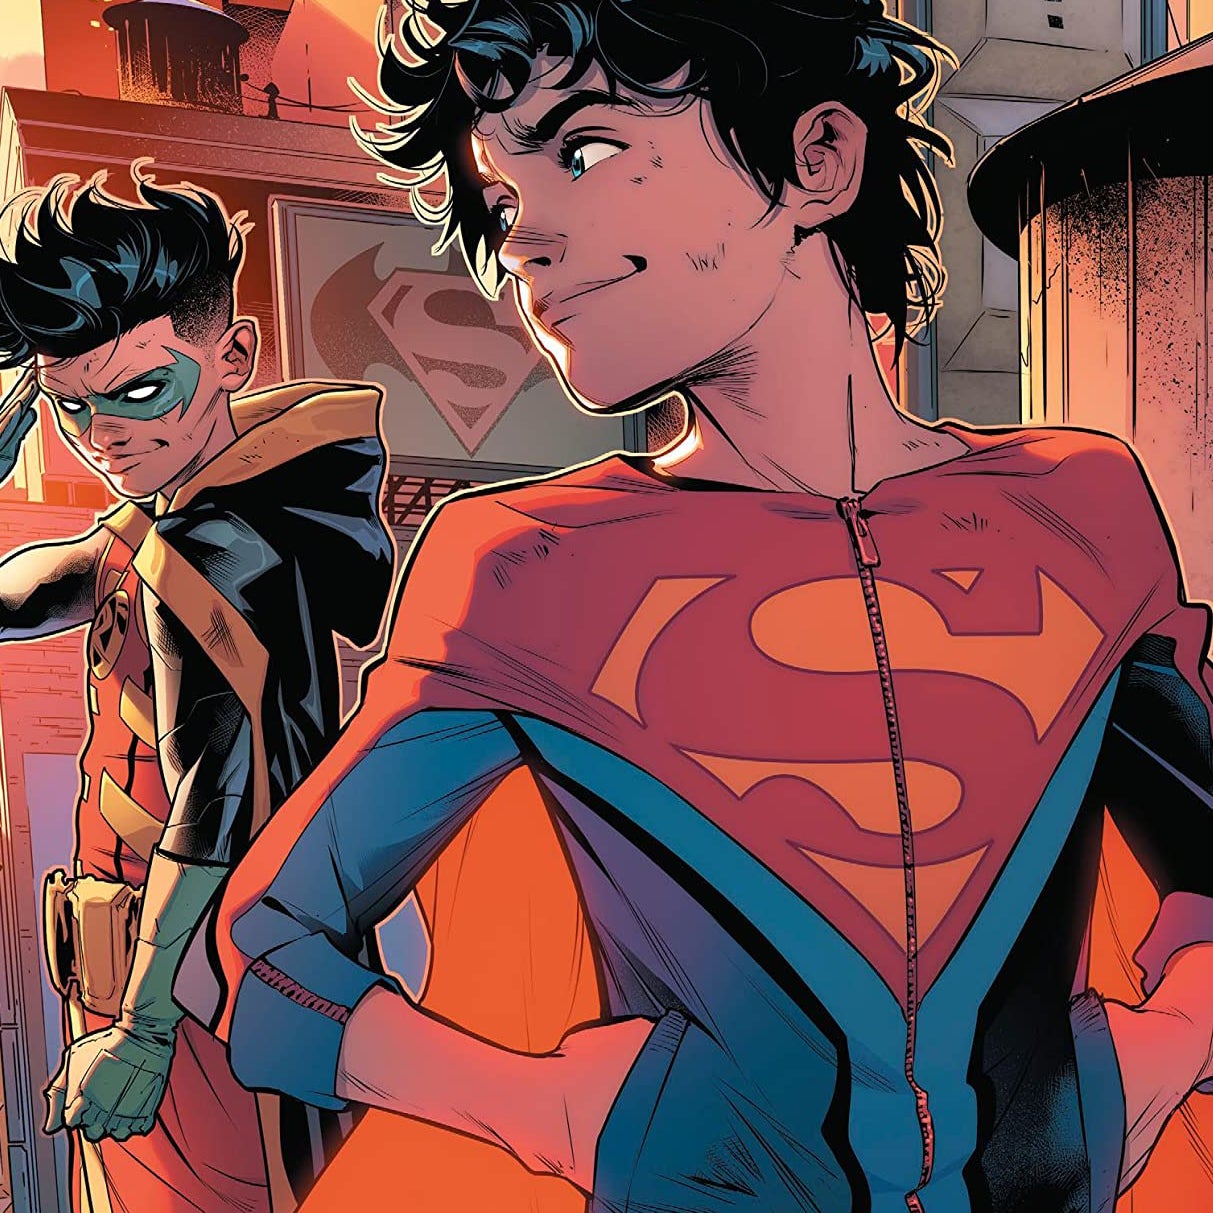 Batman and Superman: Battle of the Super Sons Review